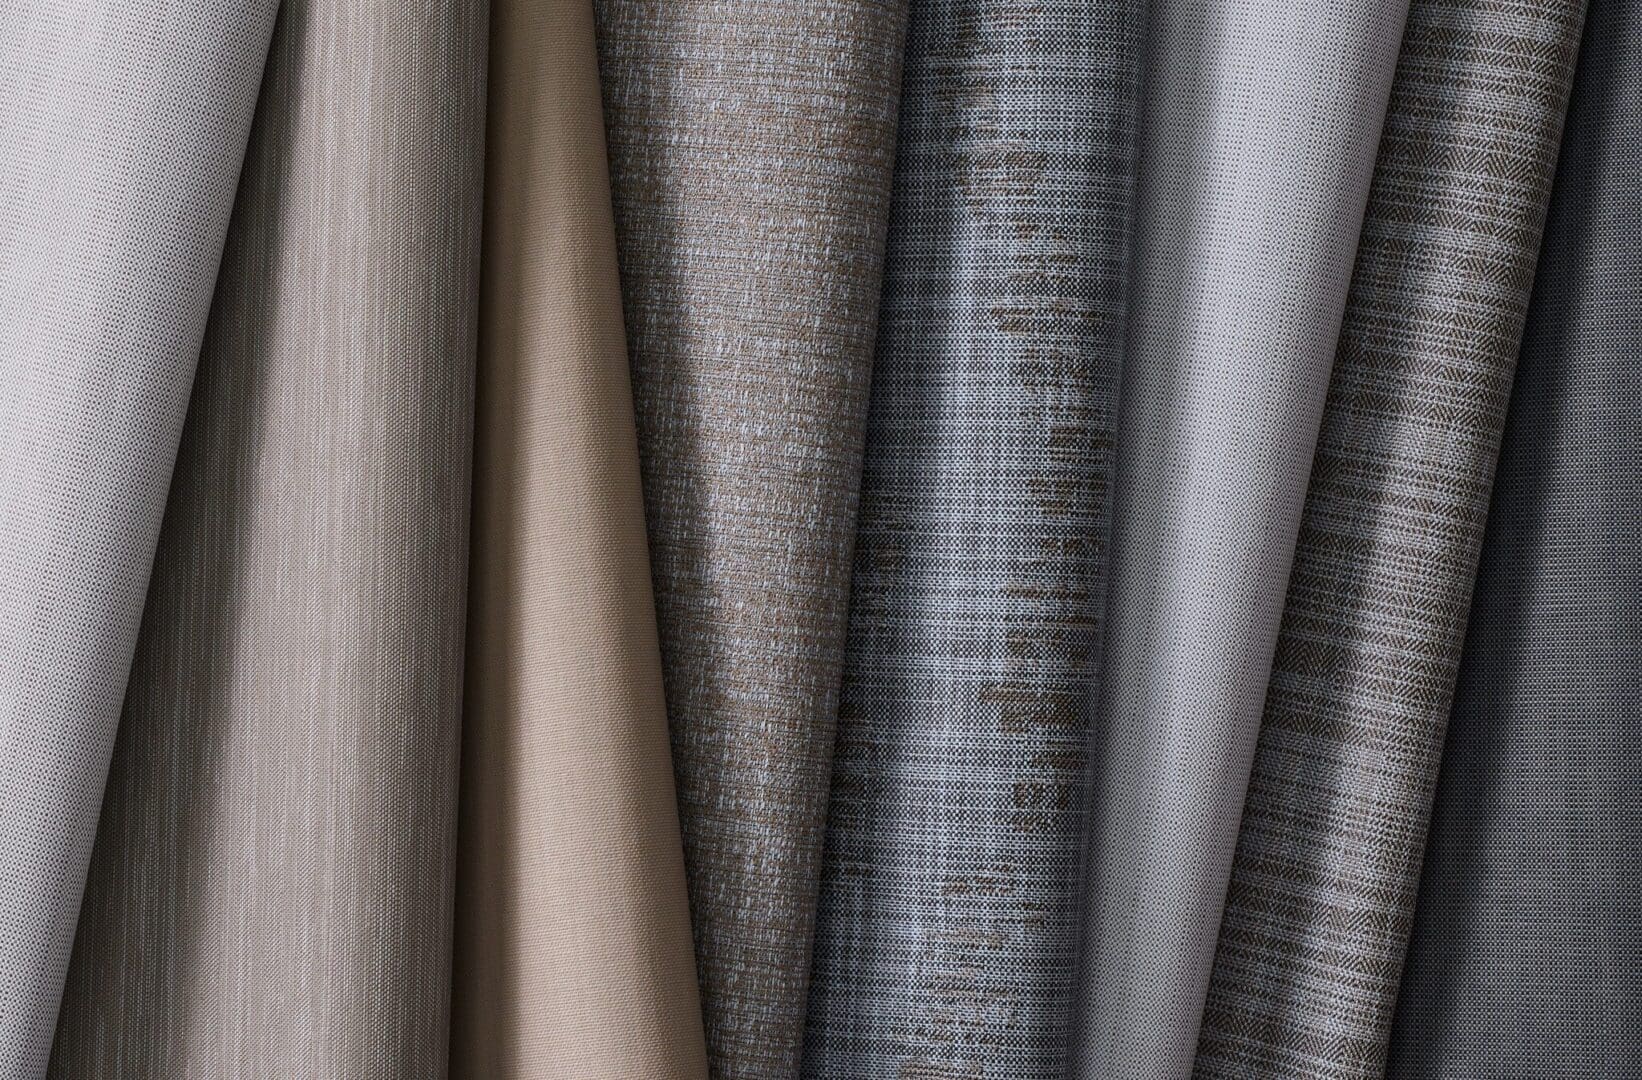 A close up of several different types of fabric